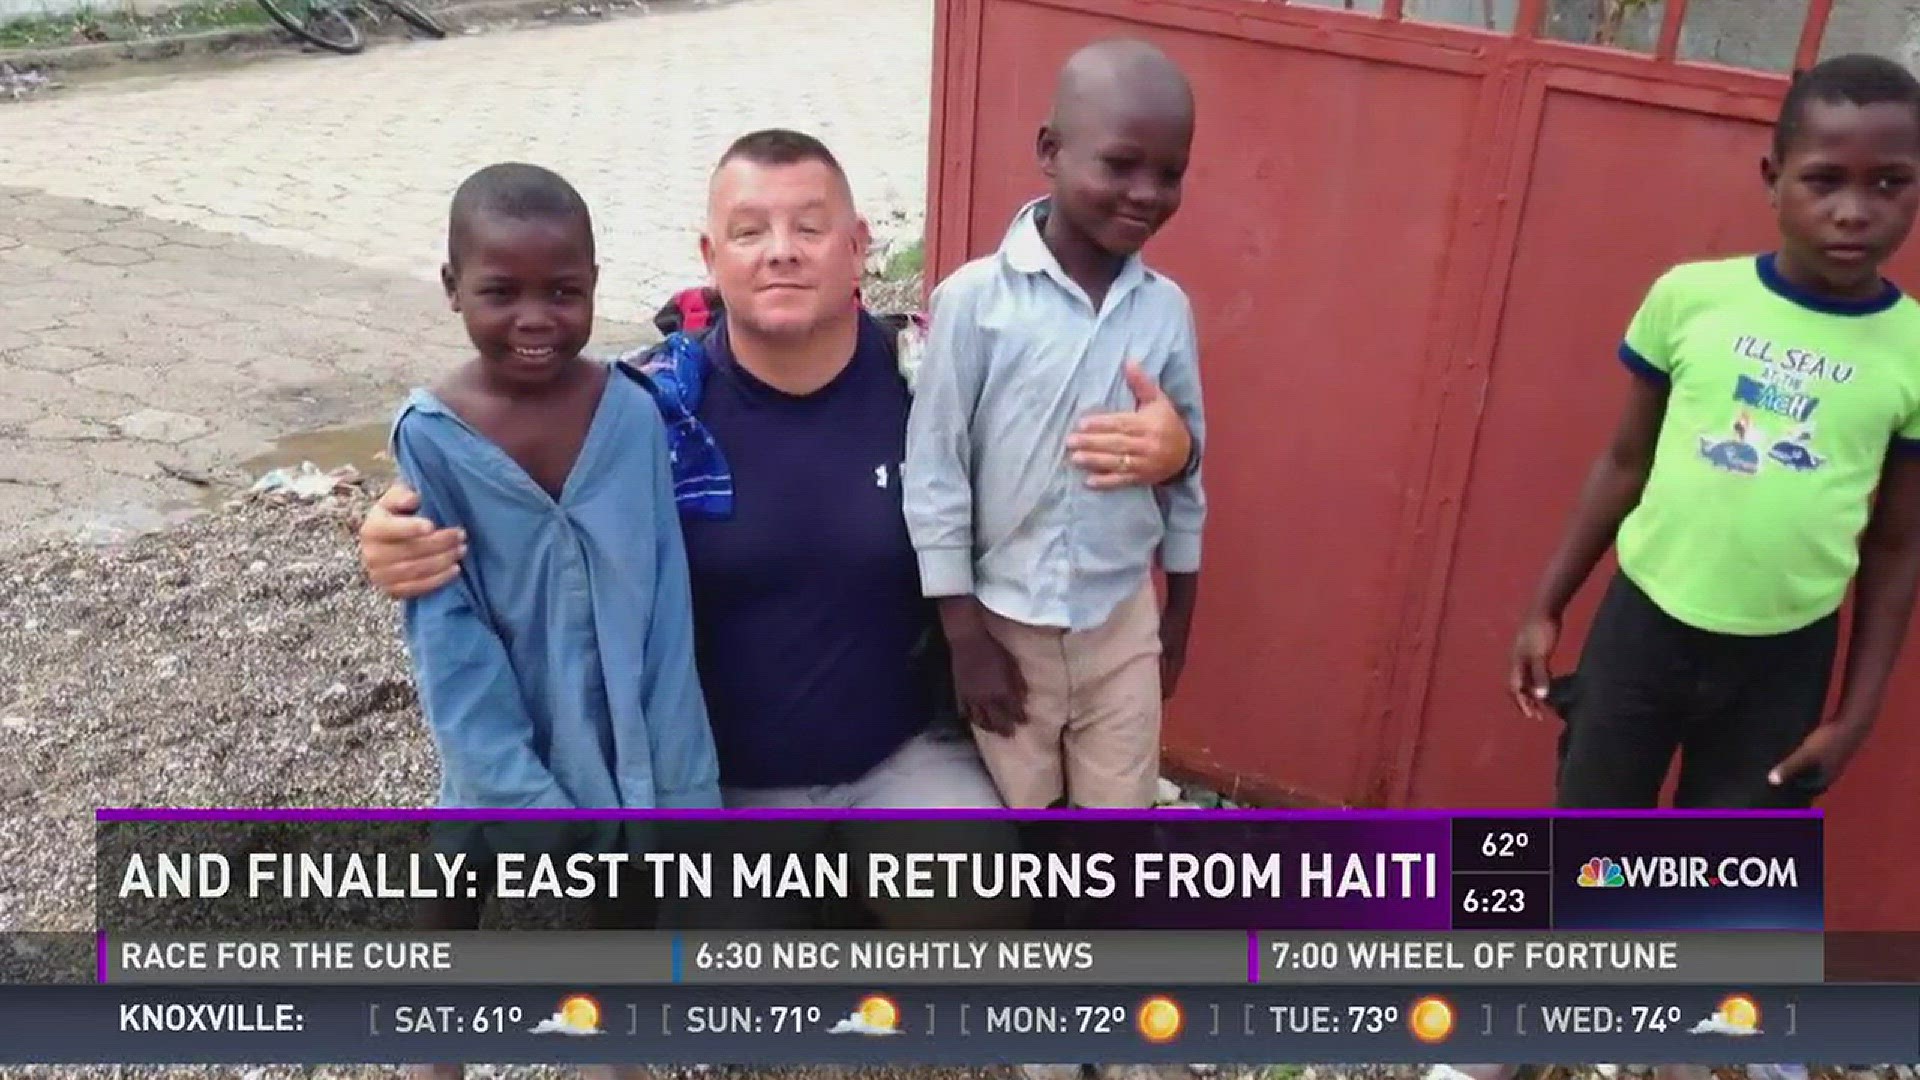 Oct. 21, 2016: A Blount County Sheriff's deputy who is used to serving the people of East Tennessee took his service overseas to help people in Haiti.